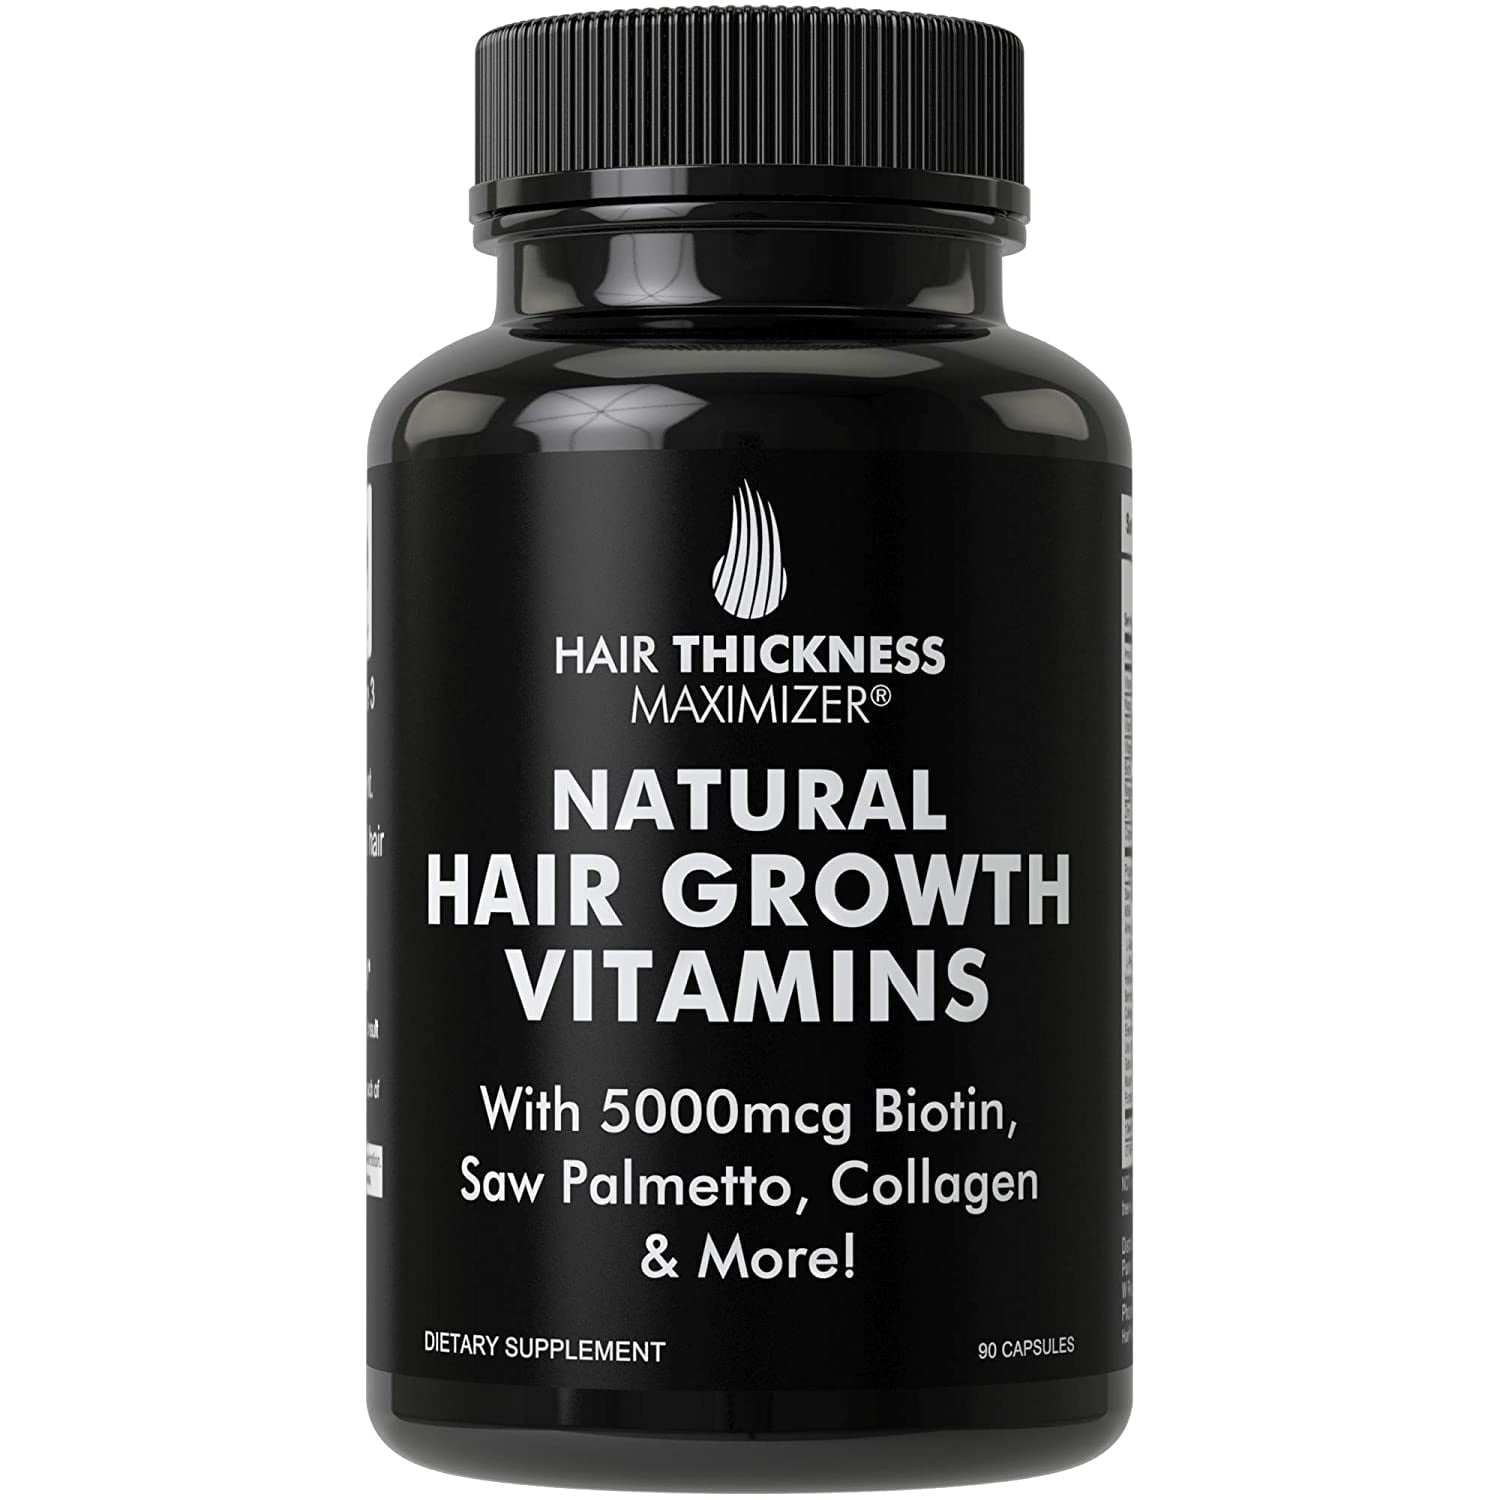 Natural Hair Growth Vitamins by Hair Thickness Maximizer - Hair Regrowth Vitamin  Supplement with Biotin 5000 mcg, Collagen, Saw Palmetto. Stop Hair Loss,  get Thicker Hair for Men, Women. Made in USA -